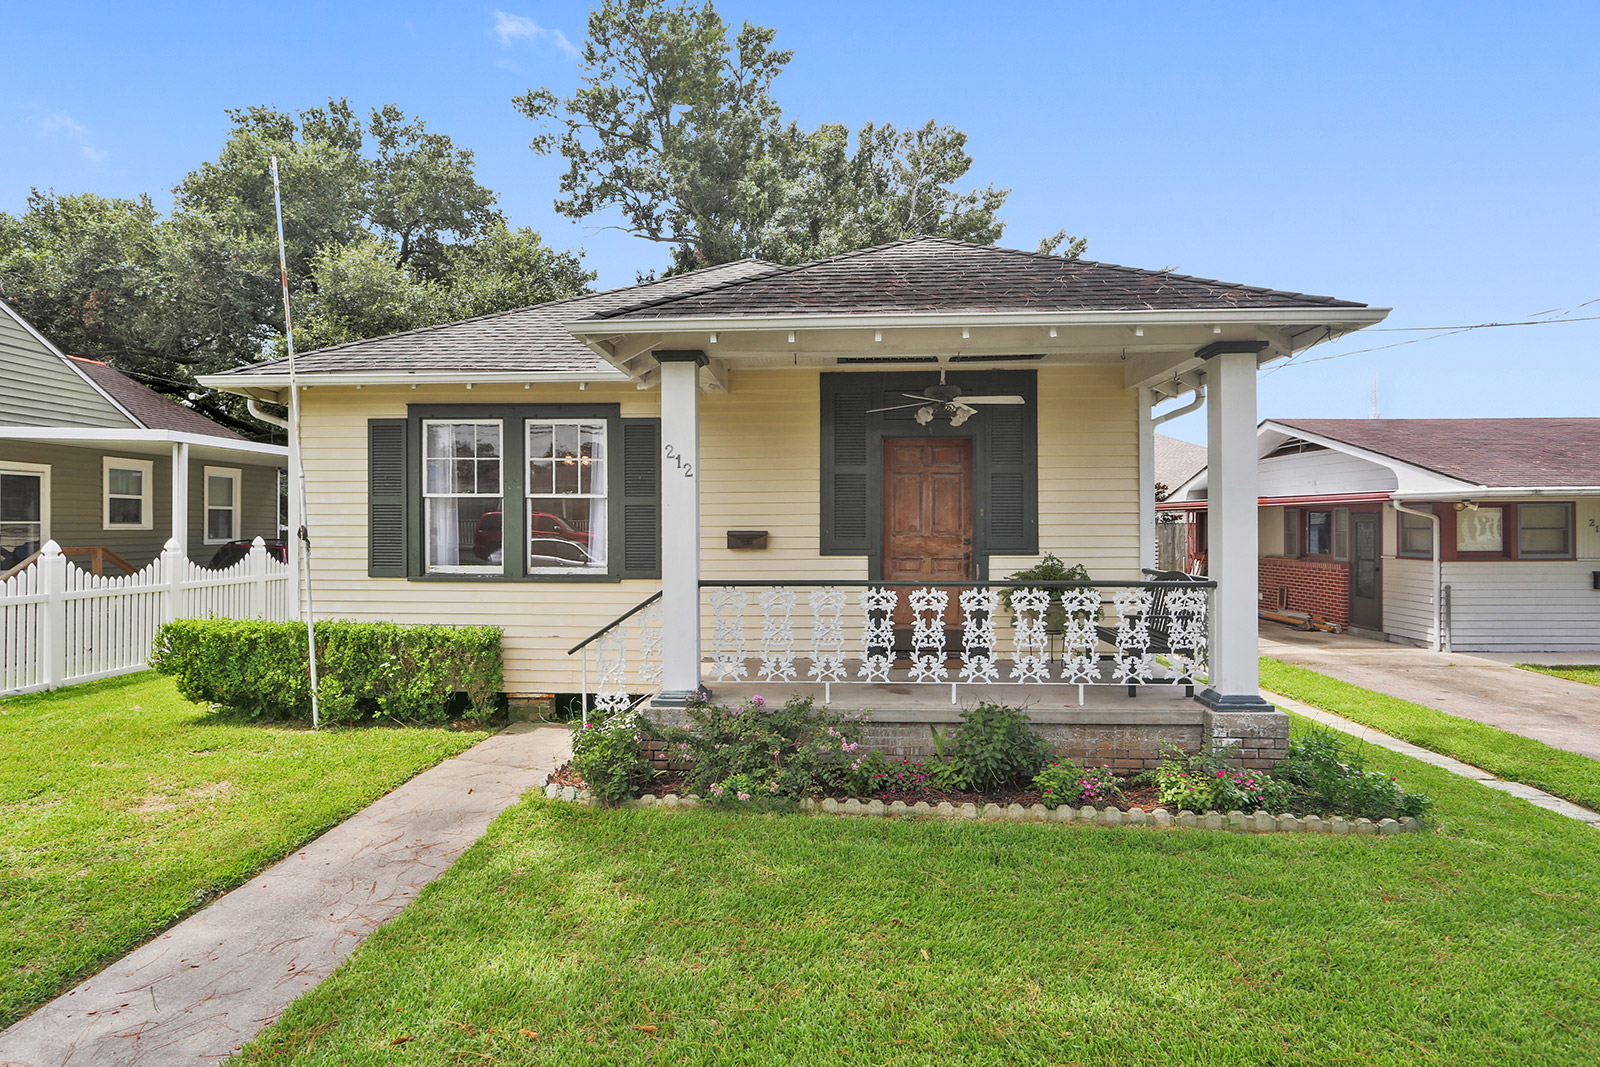 Centrally located Old Jefferson sits just outside New Orleans in Jefferson Parish and offers the convenience of big city living with the quaintness of a tight-knit community.